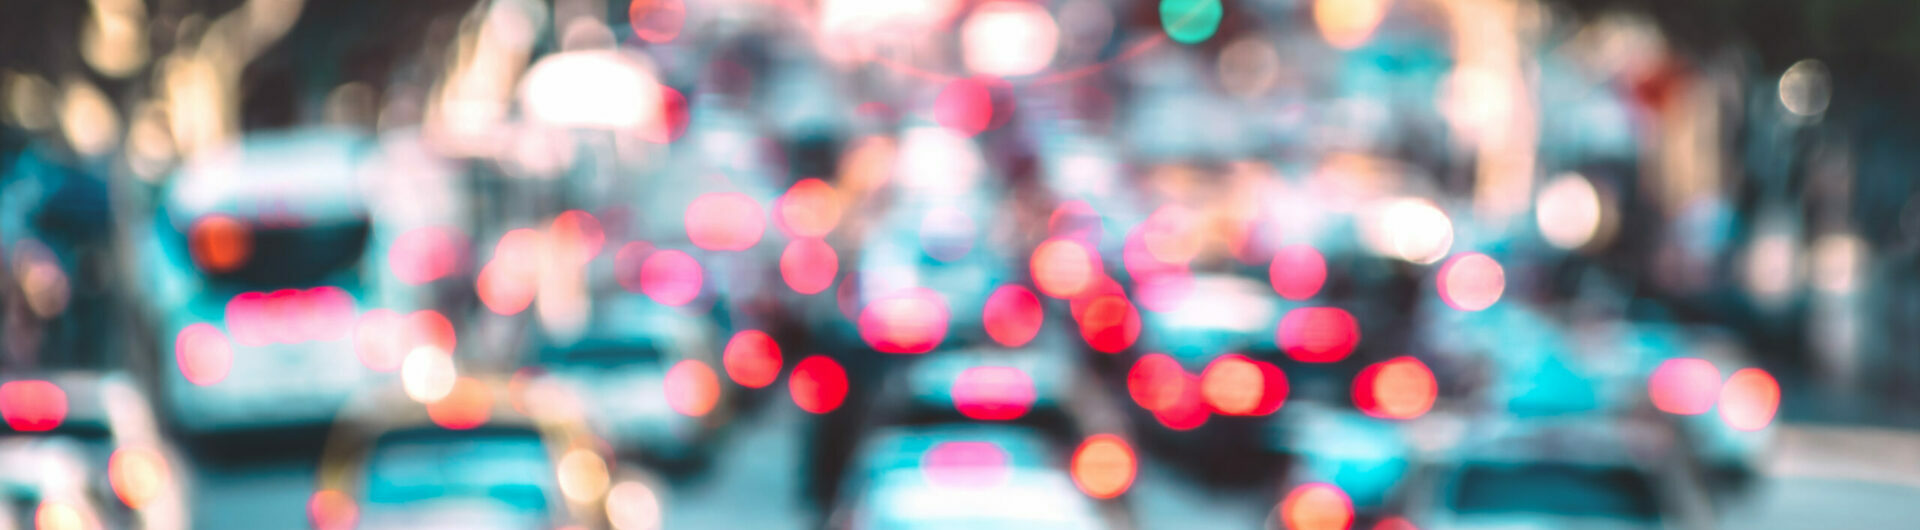 Blurred background of rush hour moment with defocused cars and generic vehicles - Traffic jam concept in Los Angeles downtown with bokeh of american iconic city with azure filtered headlights colors